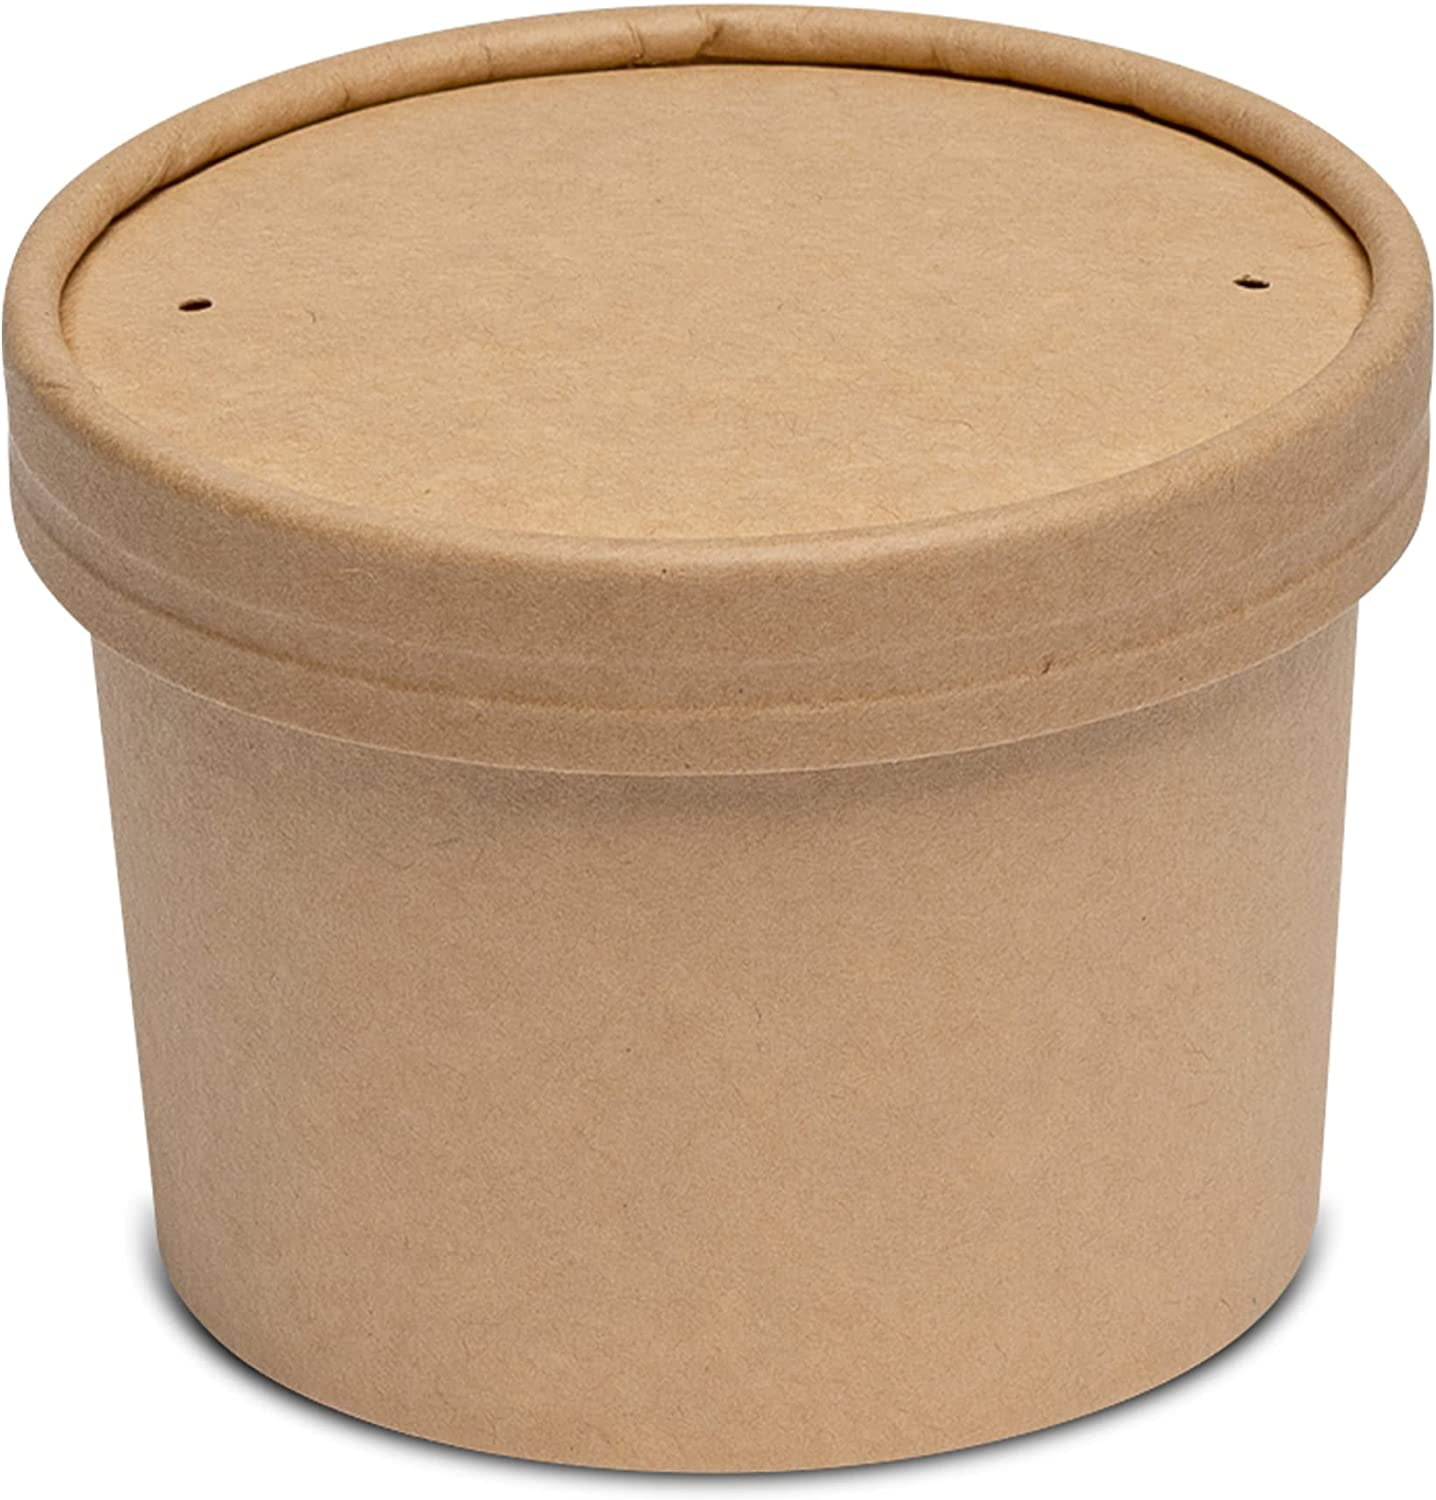 [200 Pack] 16 oz Disposable Kraft Paper Soup Containers with Plastic Lids -  Pint Ice Cream Containers, Frozen Yogurt Cups, Restaurant, Microwavable